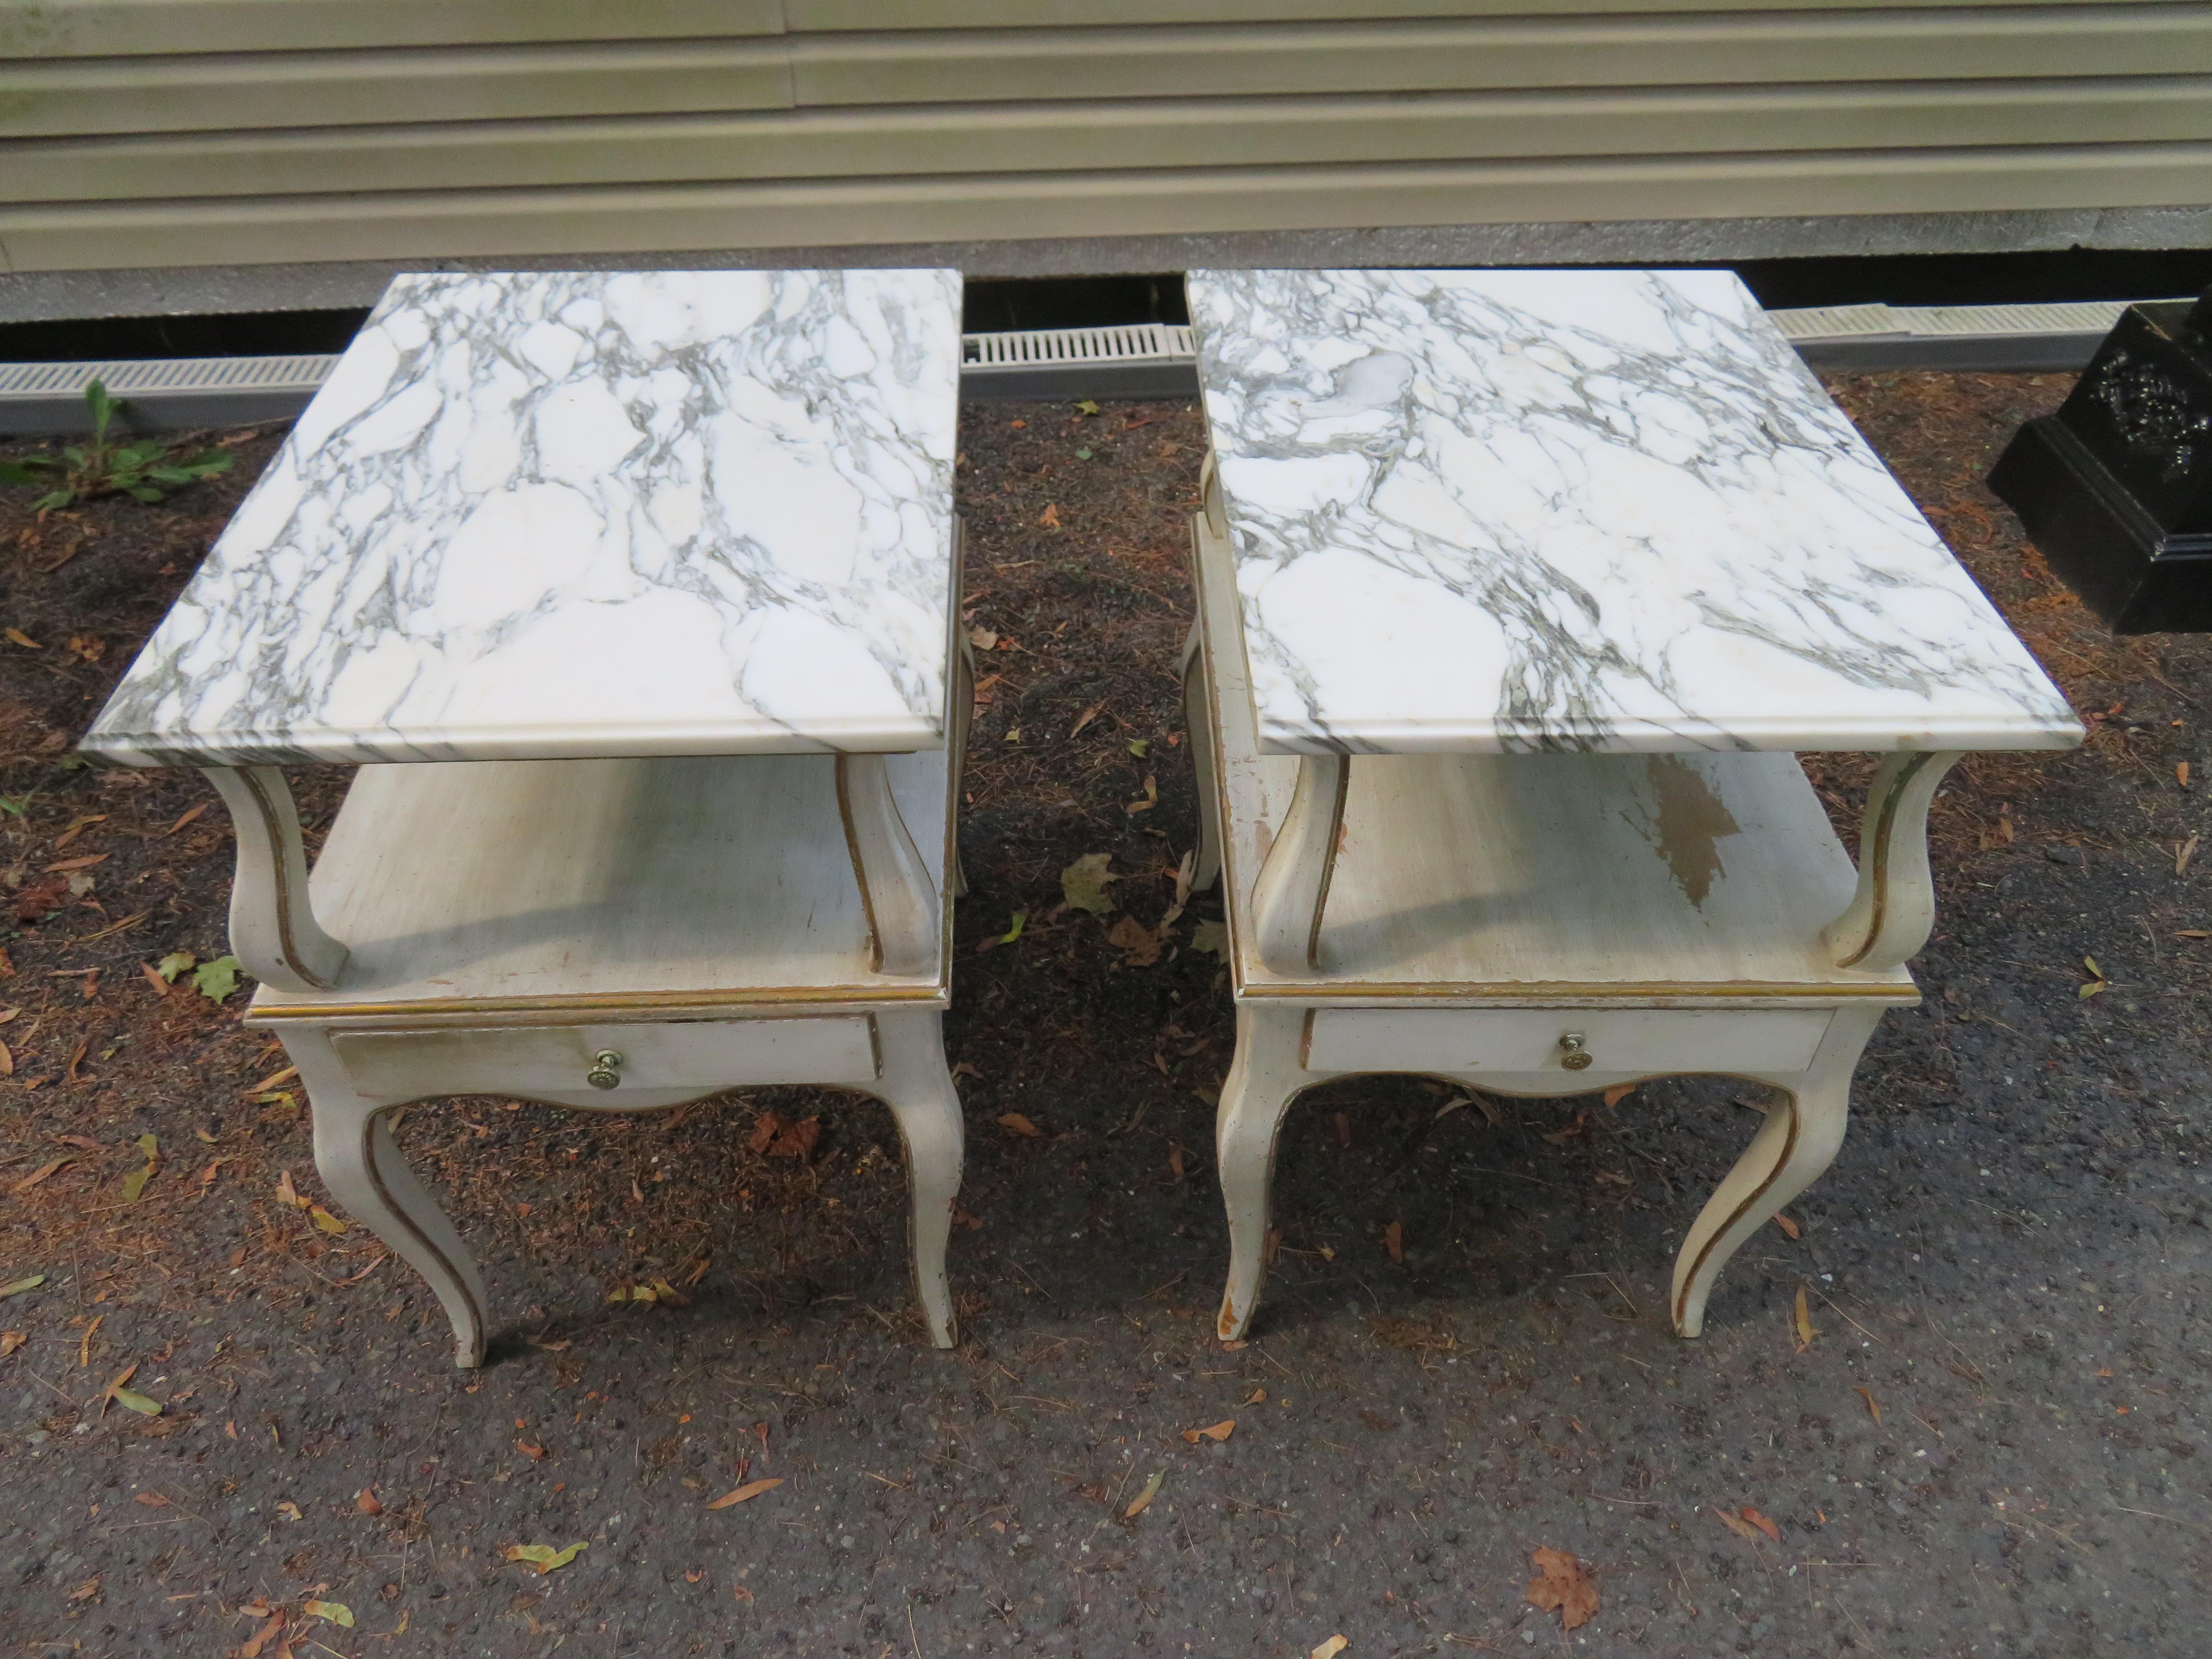 Lovely pair of Dorothy Draper style marble-top nightstands with one-drawer each. The original creamy white finish is intentionally distressed and has gold accents.